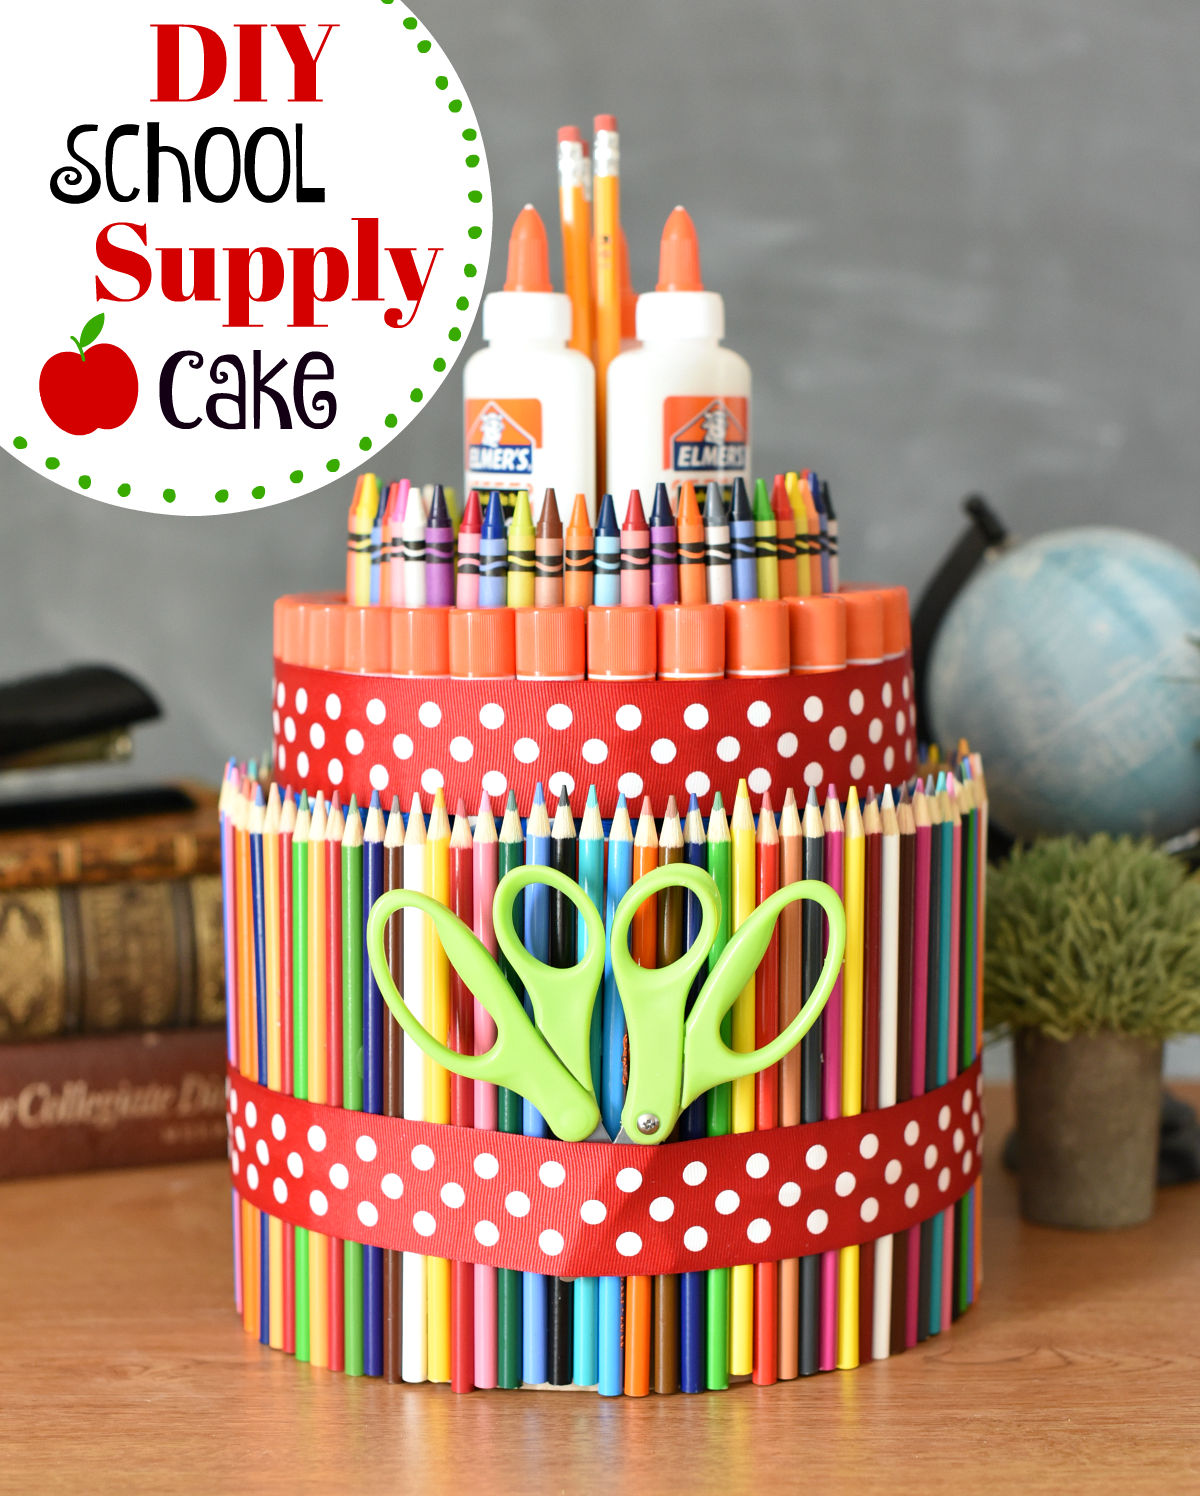 School Supply Cake. Such a fun way to make going back to school fun. So simple to put together, you'll want to make them for everyone. #backtoschool #schoolsupplies #funschoolsupplies #schoolsupplycake